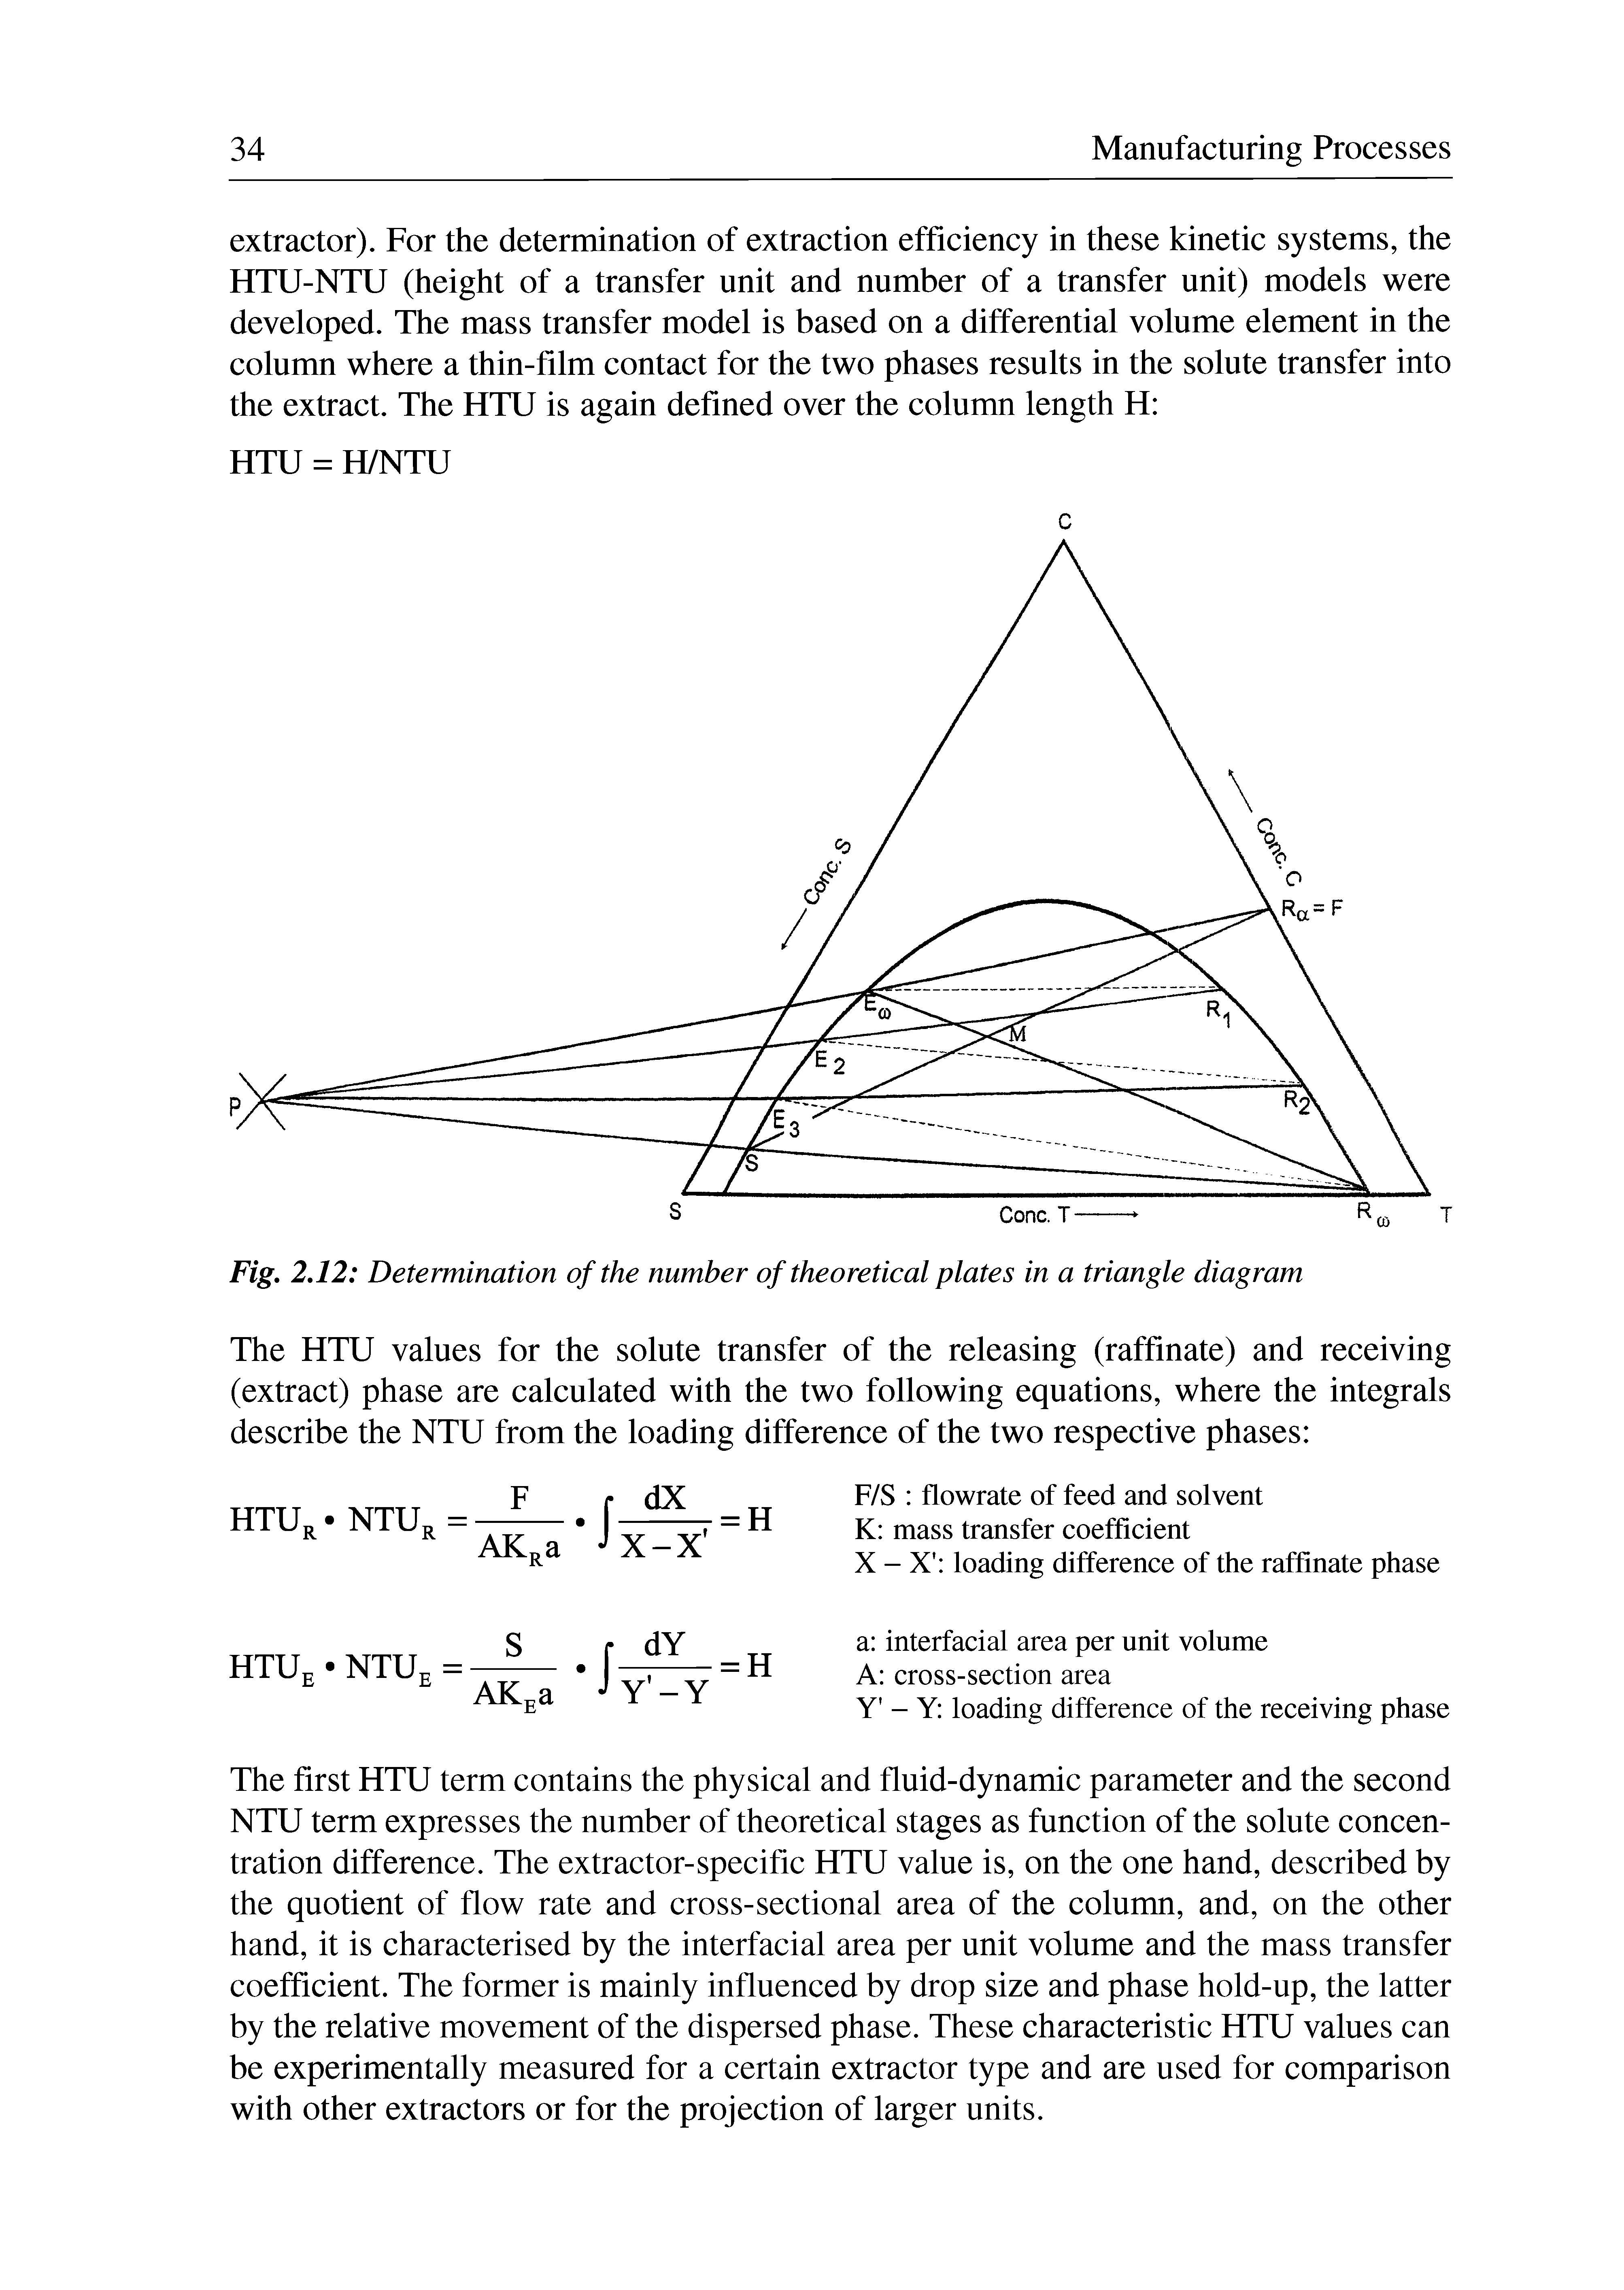 Fig. 2.12 Determination of the number of theoretical plates in a triangle diagram...